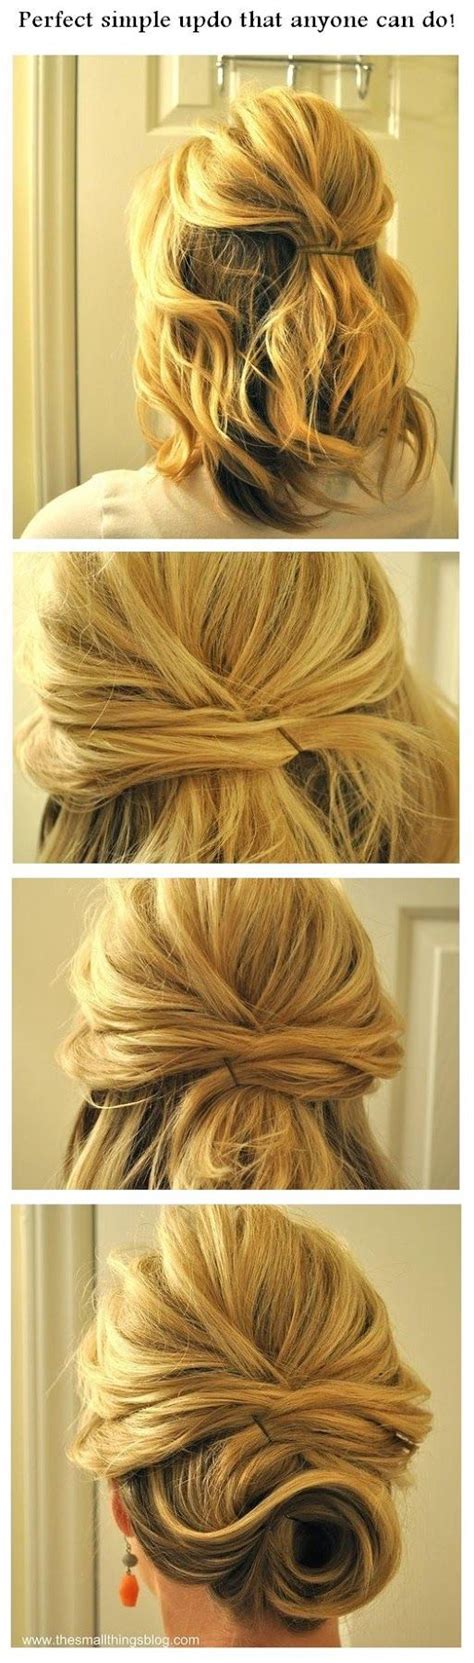 There are short hairstyles for wedding guests, as well as wedding guest hairstyles for long hair—and everything in between. 10+ images about Do It Yourself Updos on Pinterest | Updo, Elegant updo and My hair